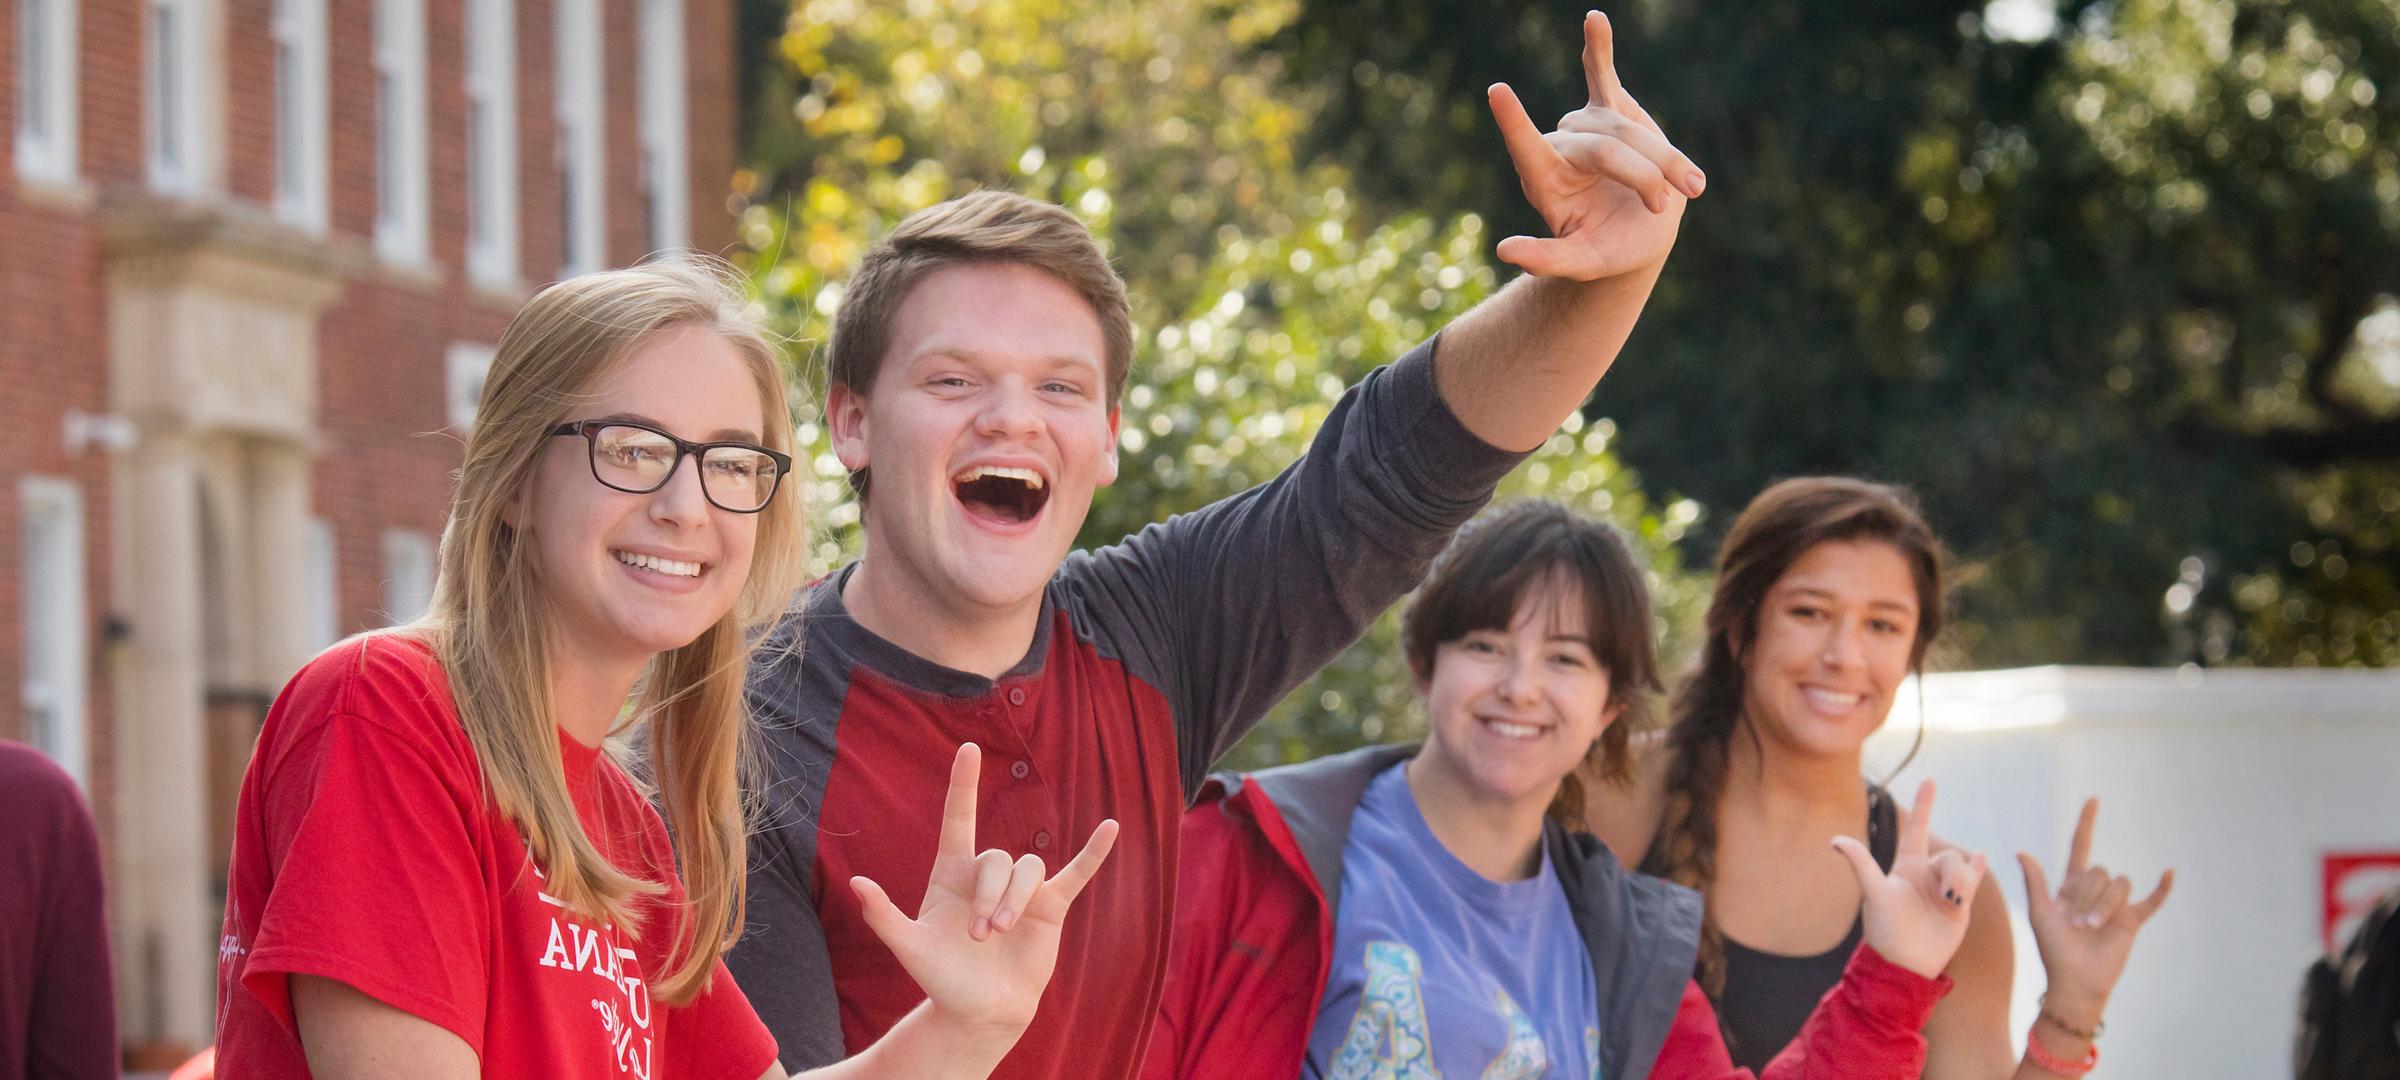 students smiling and making the UL hand sign